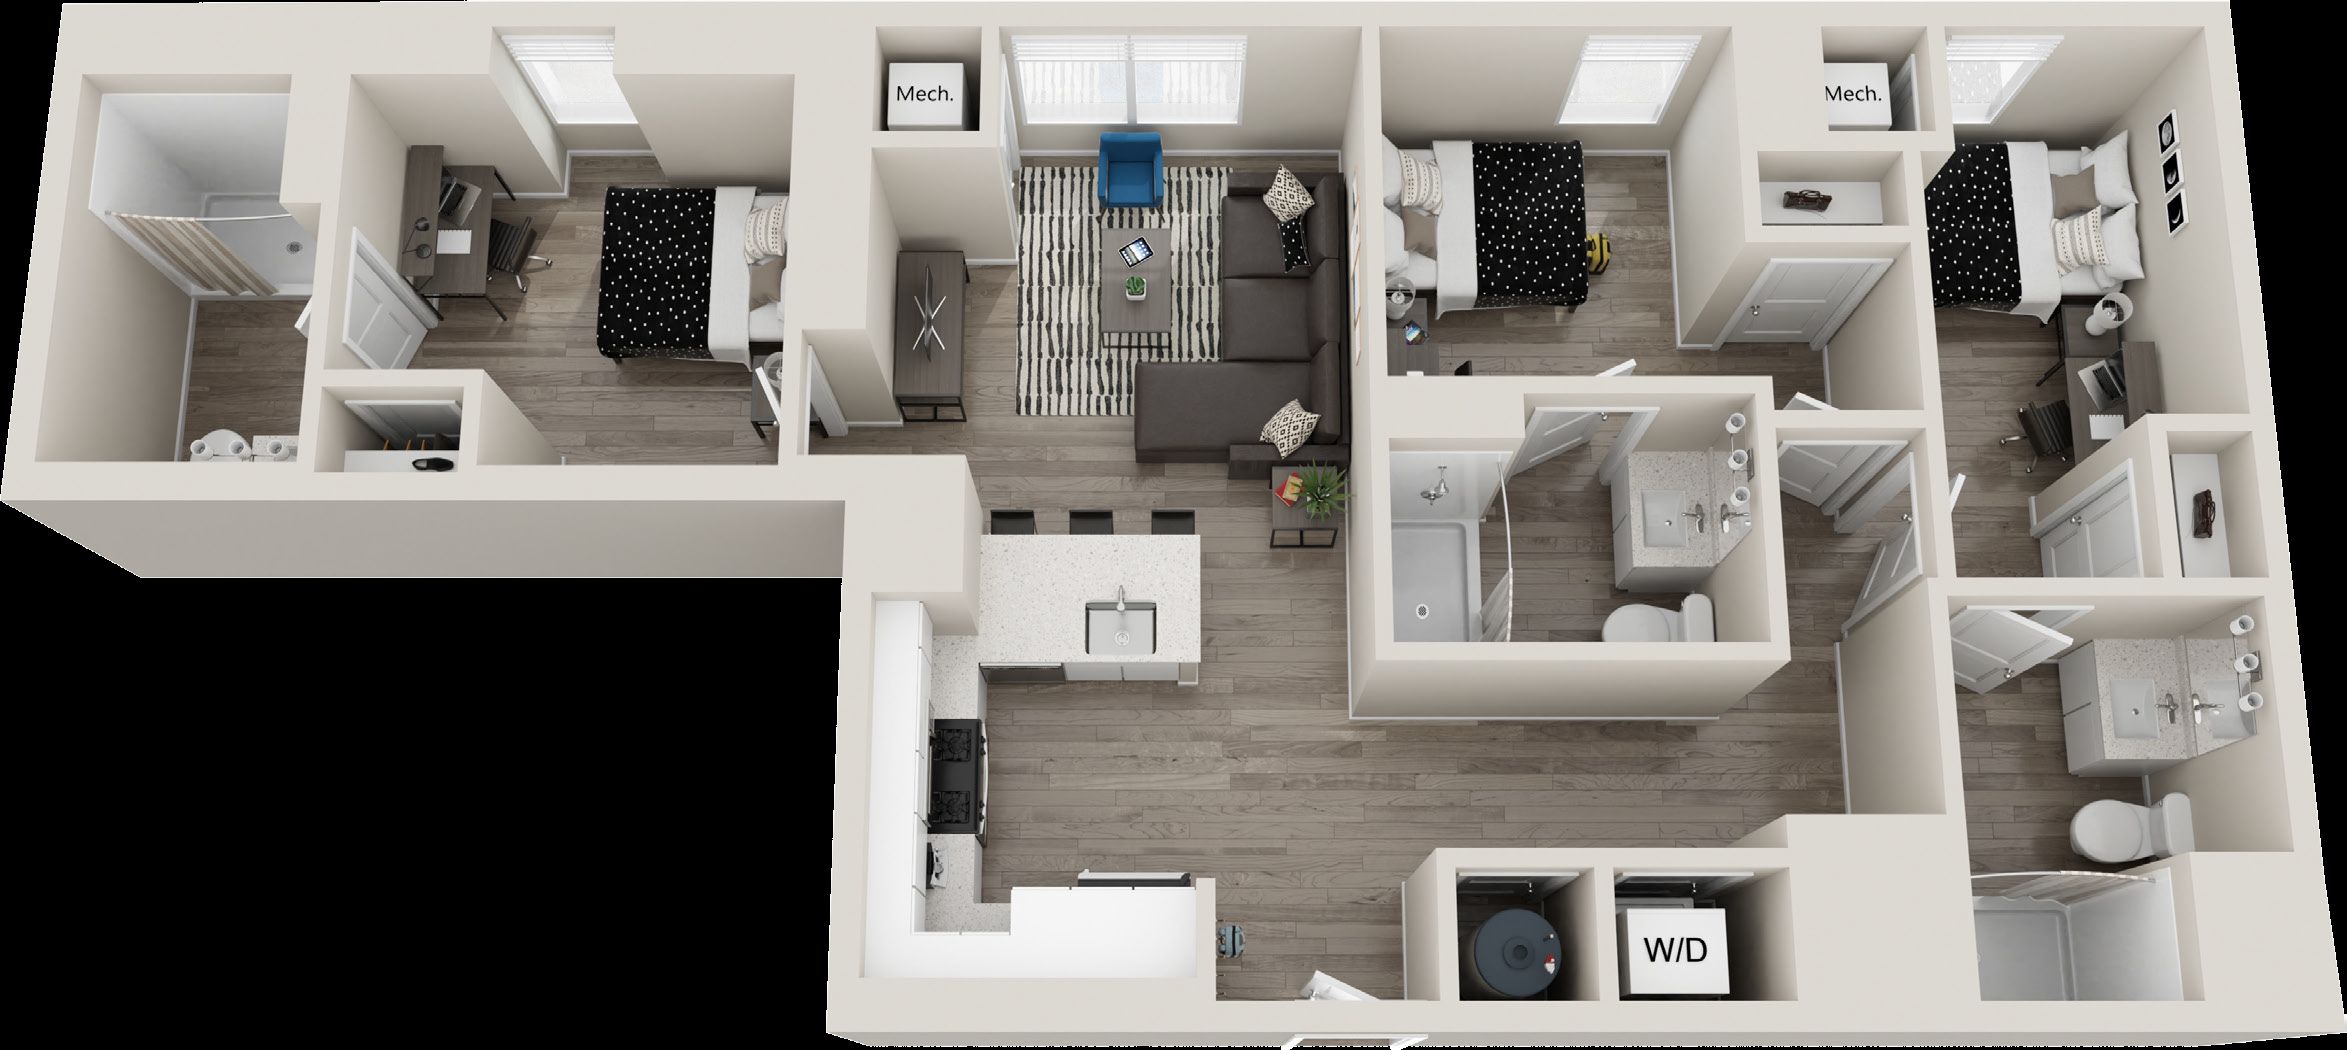 The Standard at Philadelphia at 119 South 31st Street. Floor plan of a three-bedroom apartment of type Chastain. Credit: Landmark Properties